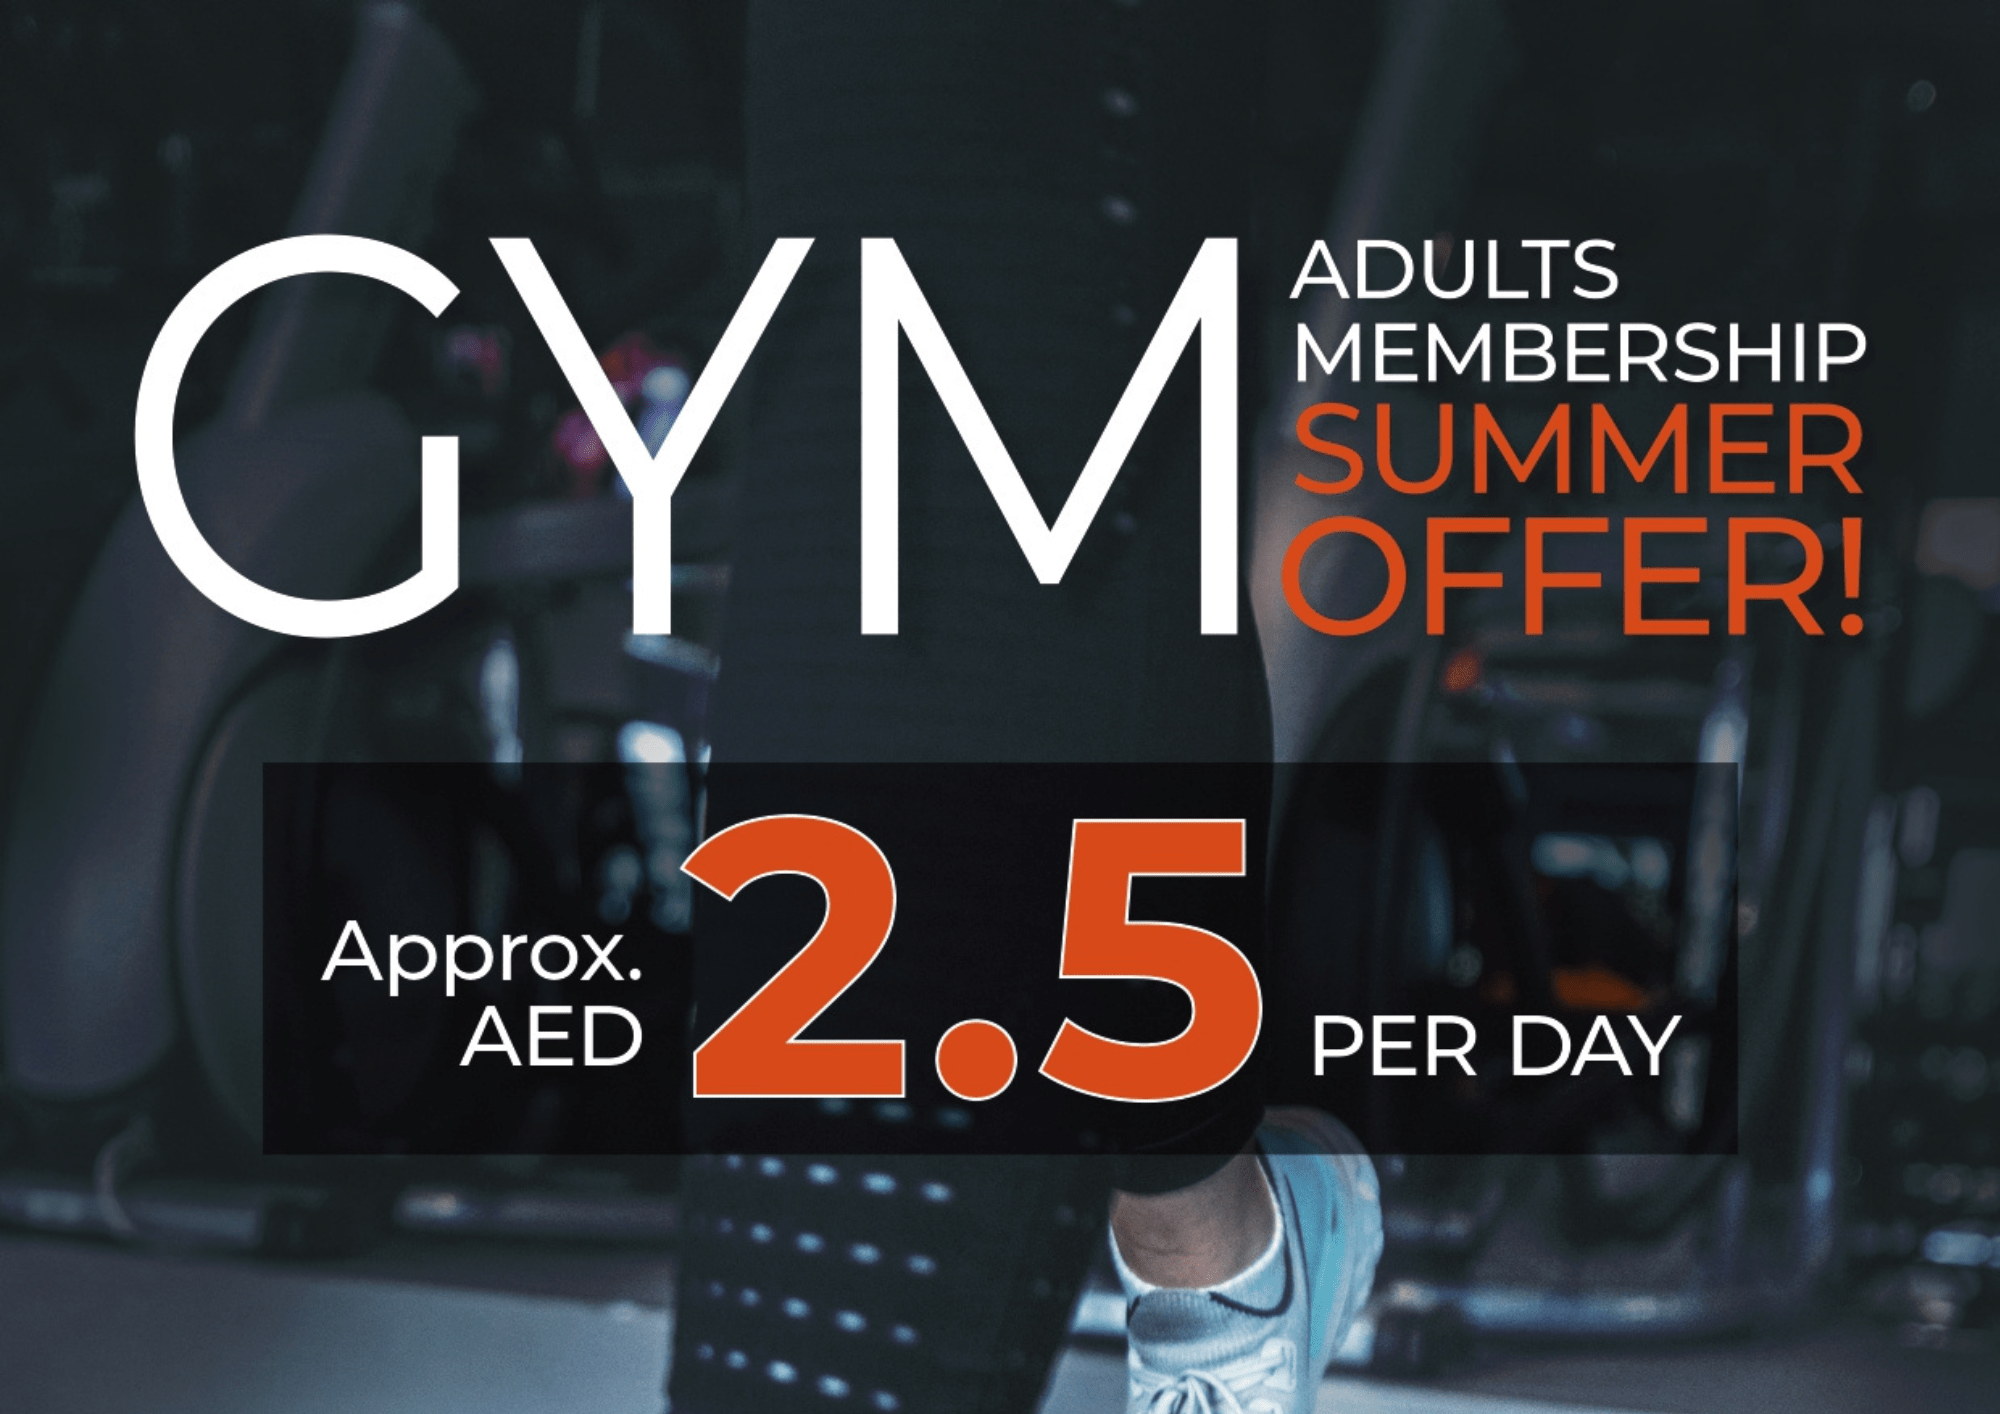 GYM ADULTS MEMBERSHIP SUMMER OFFER!